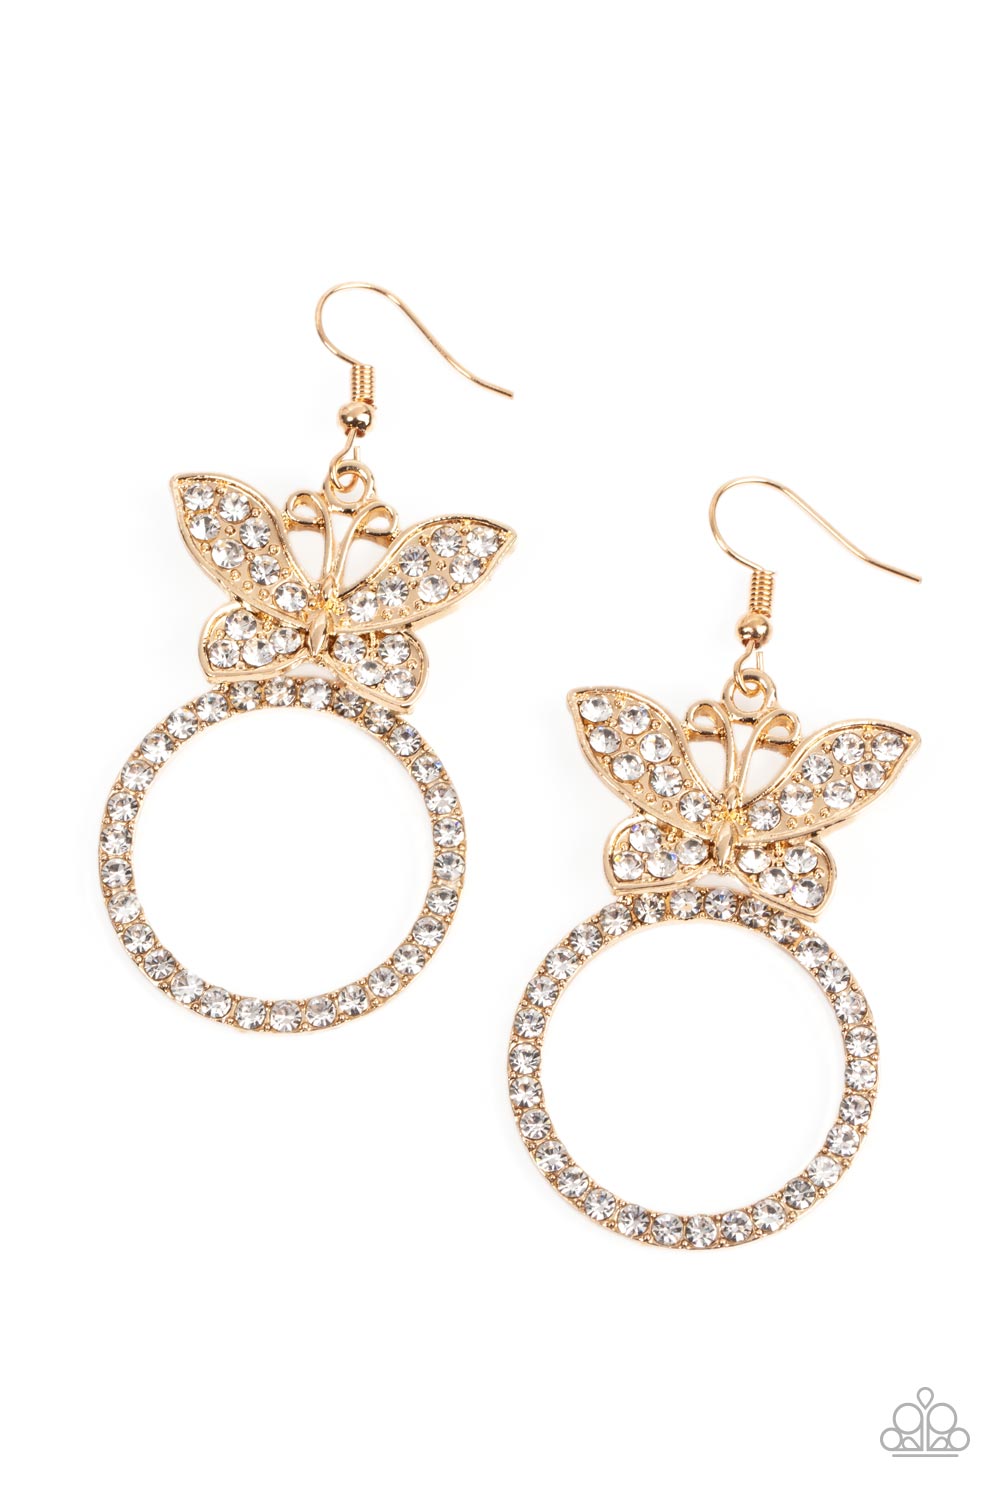 Paradise Found - Gold Butterfly Earrings - Paparazzi Accessories - Paparazzi Accessories 